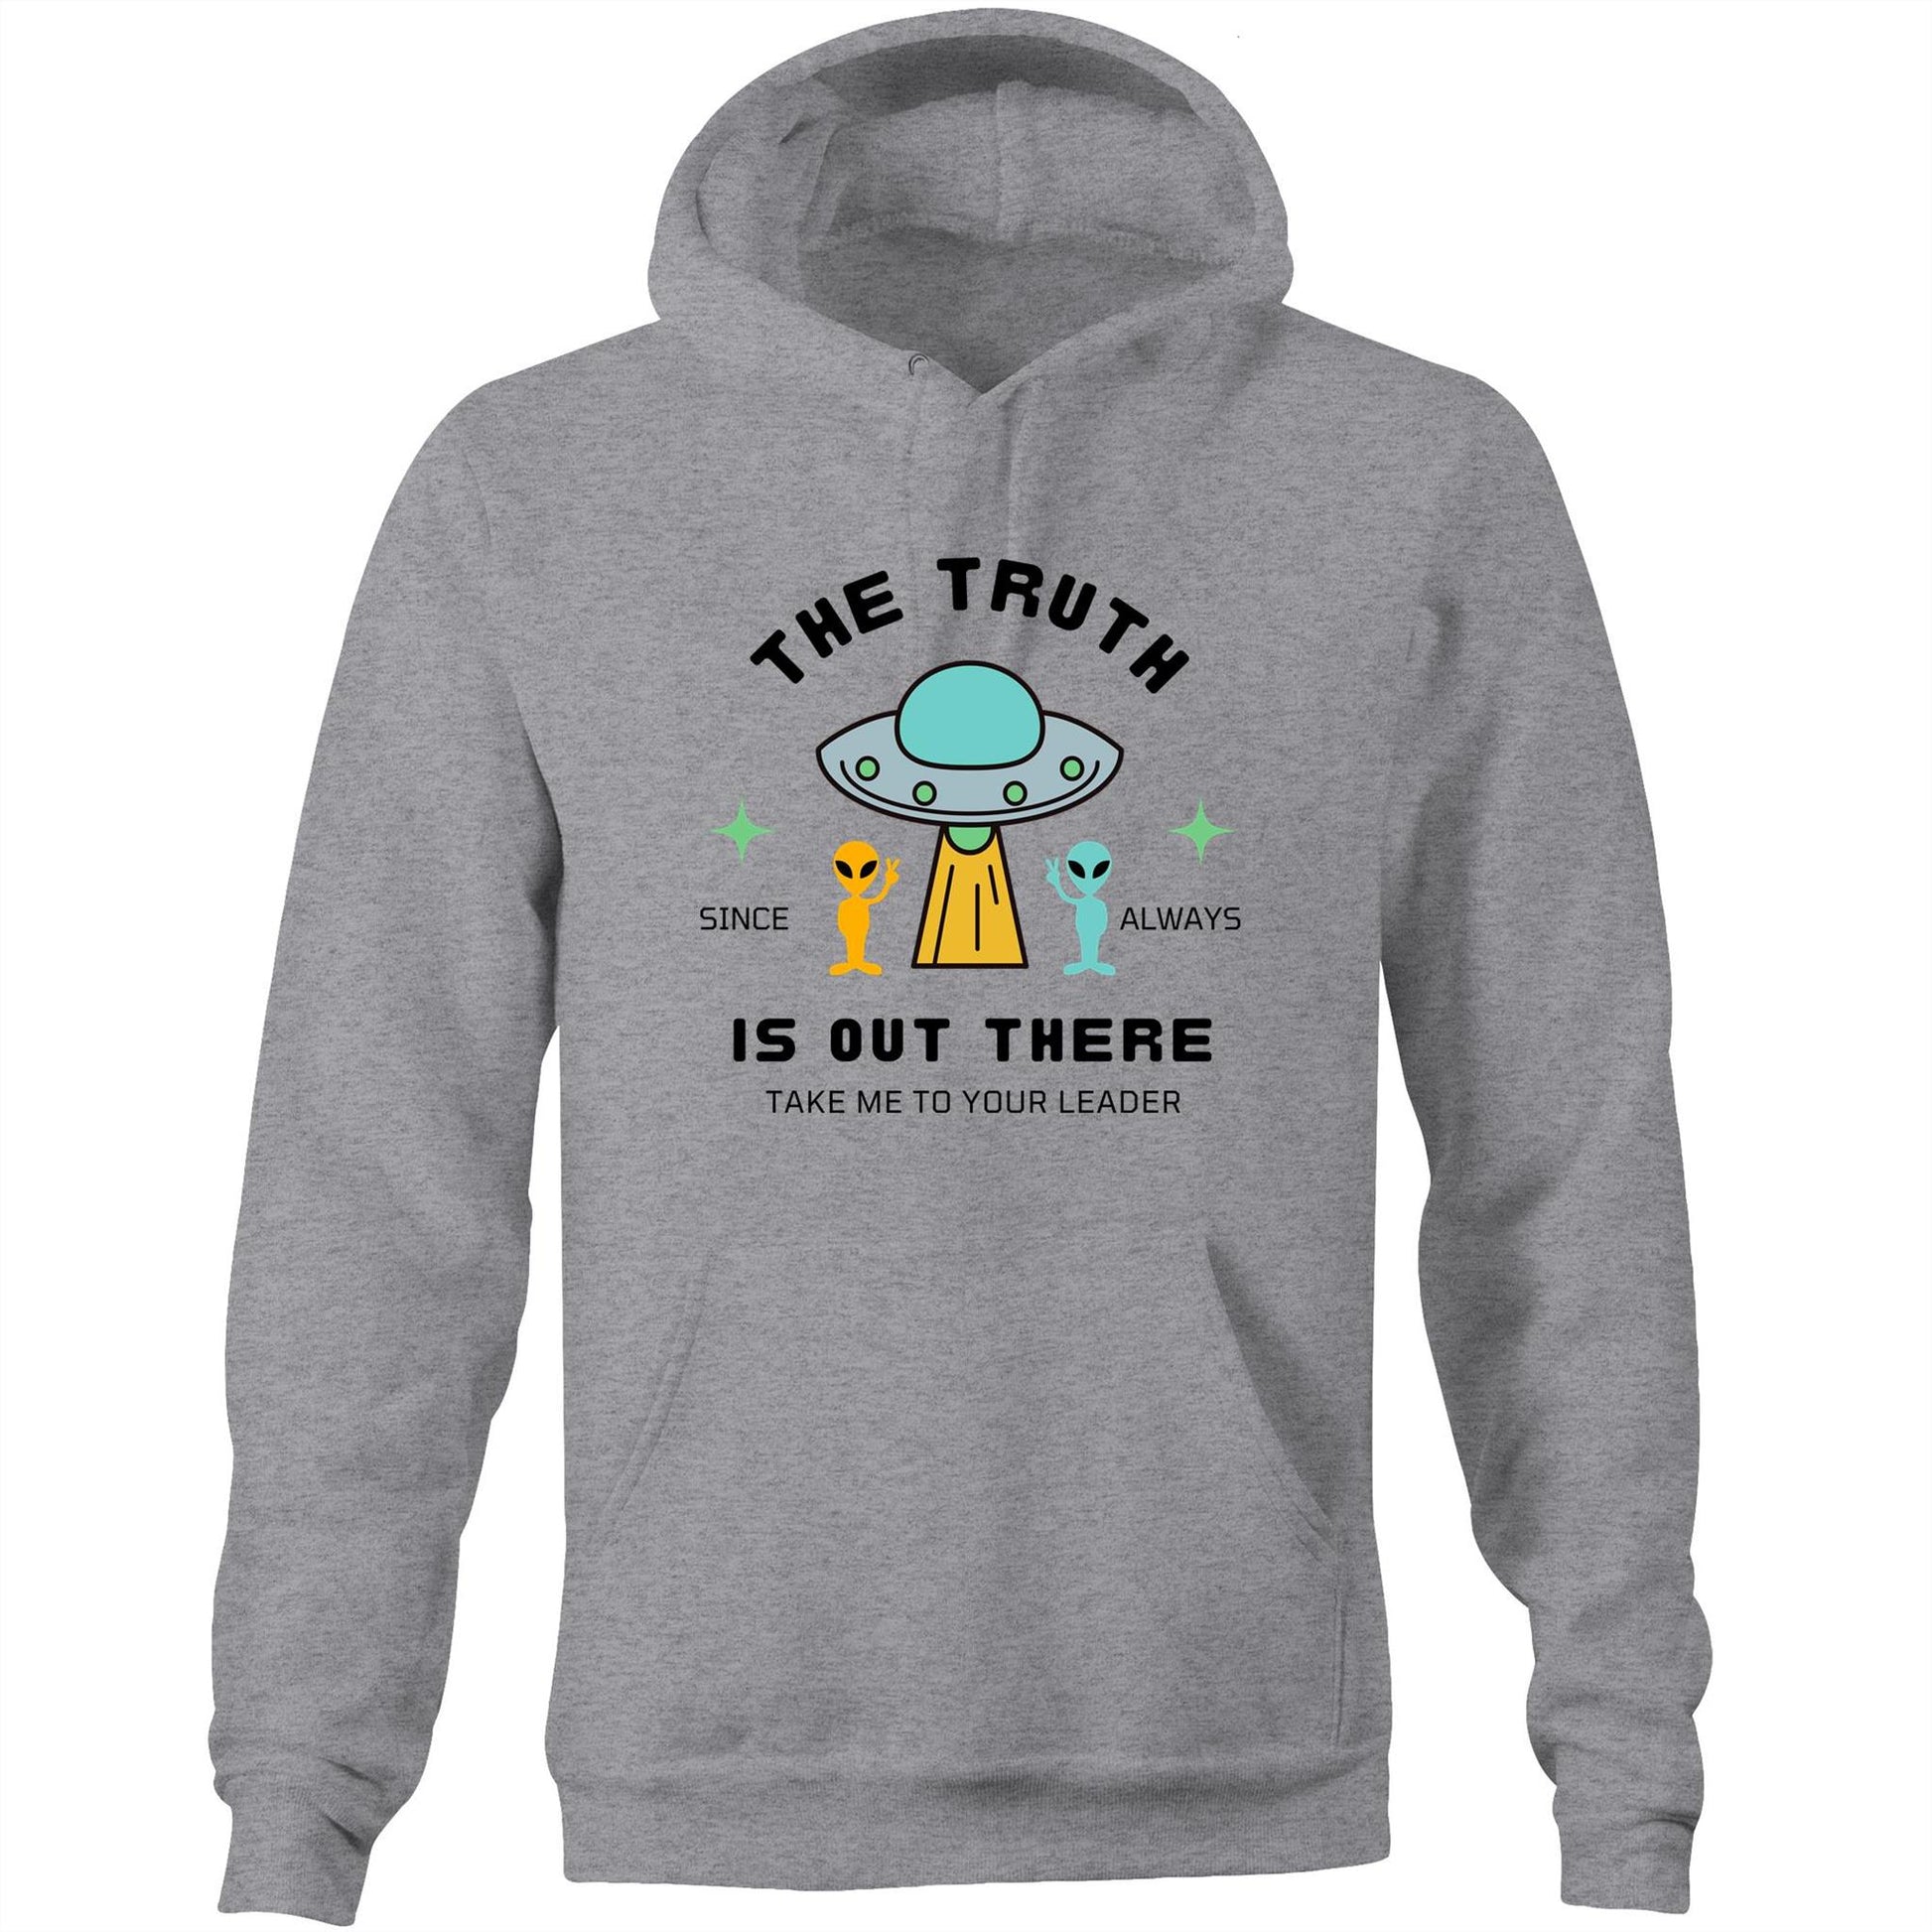 The Truth Is Out There - Pocket Hoodie Sweatshirt Grey Marle Hoodie Sci Fi